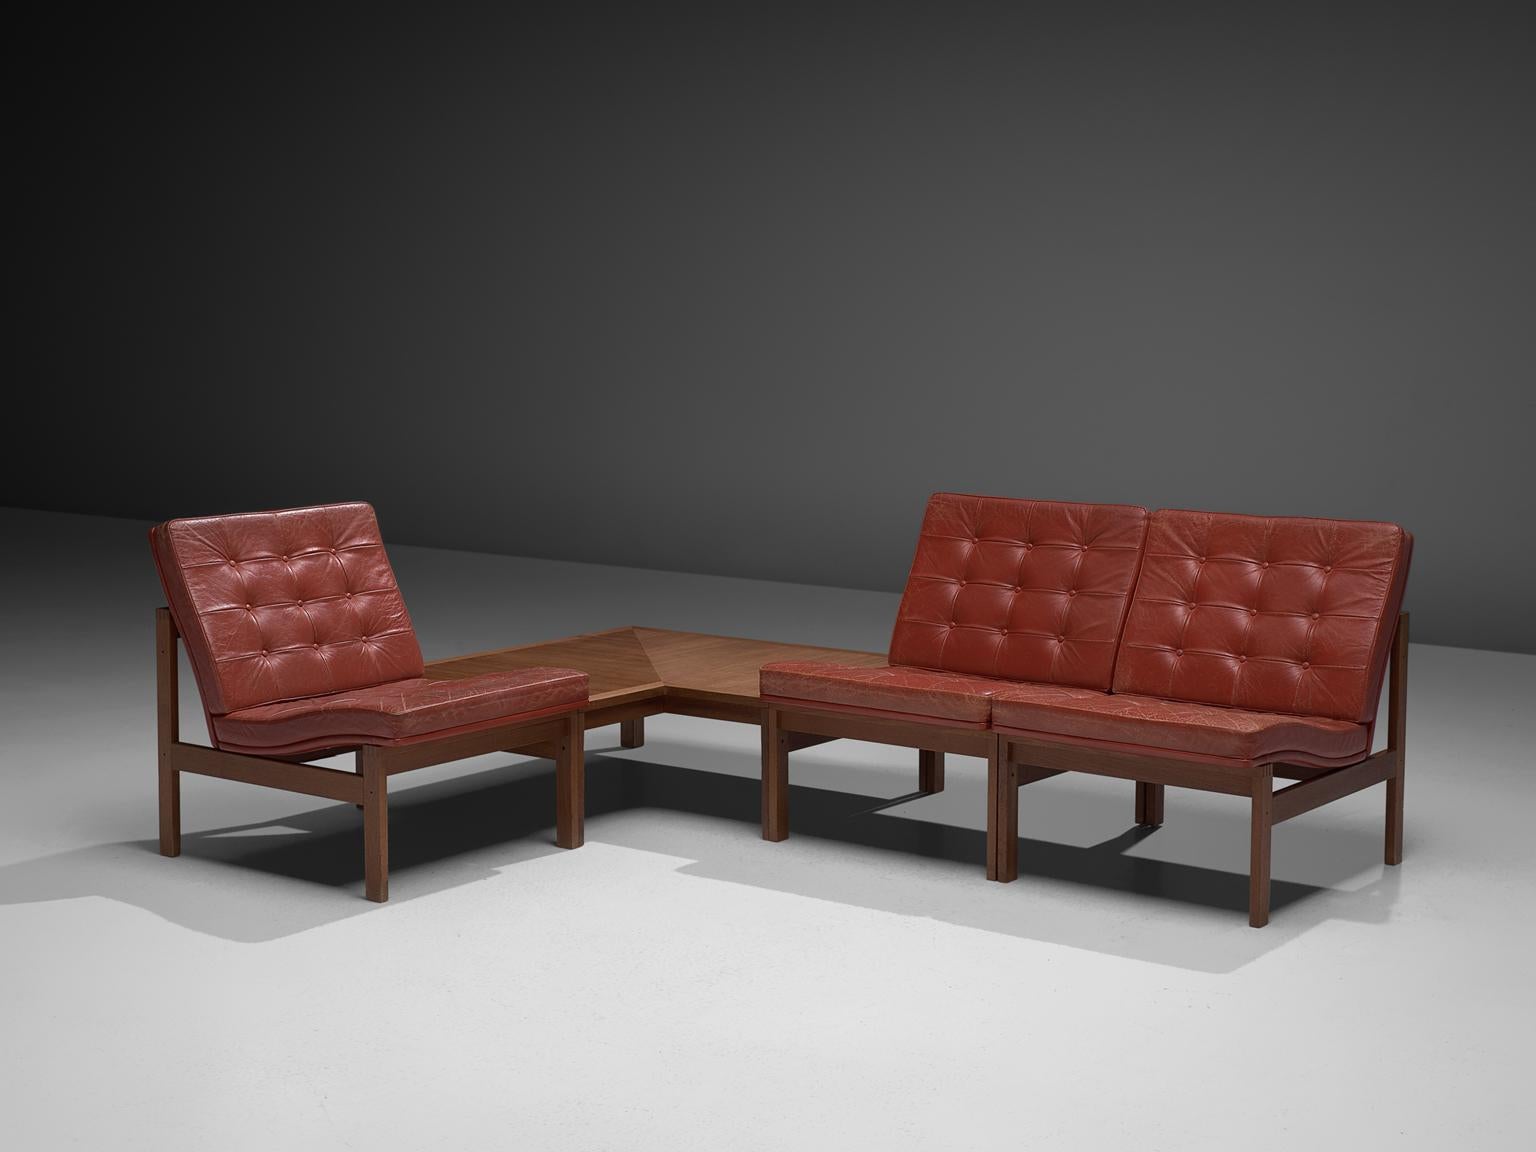 Ole Gjerløv-Knudsen & Torben Lind for France & Søn, three moduline lounge chairs, teak and red leather and one teak tables, Denmark, 1962 

Modern and beautiful colored modular set of slipper chairs and teak table. It consists of three modular easy